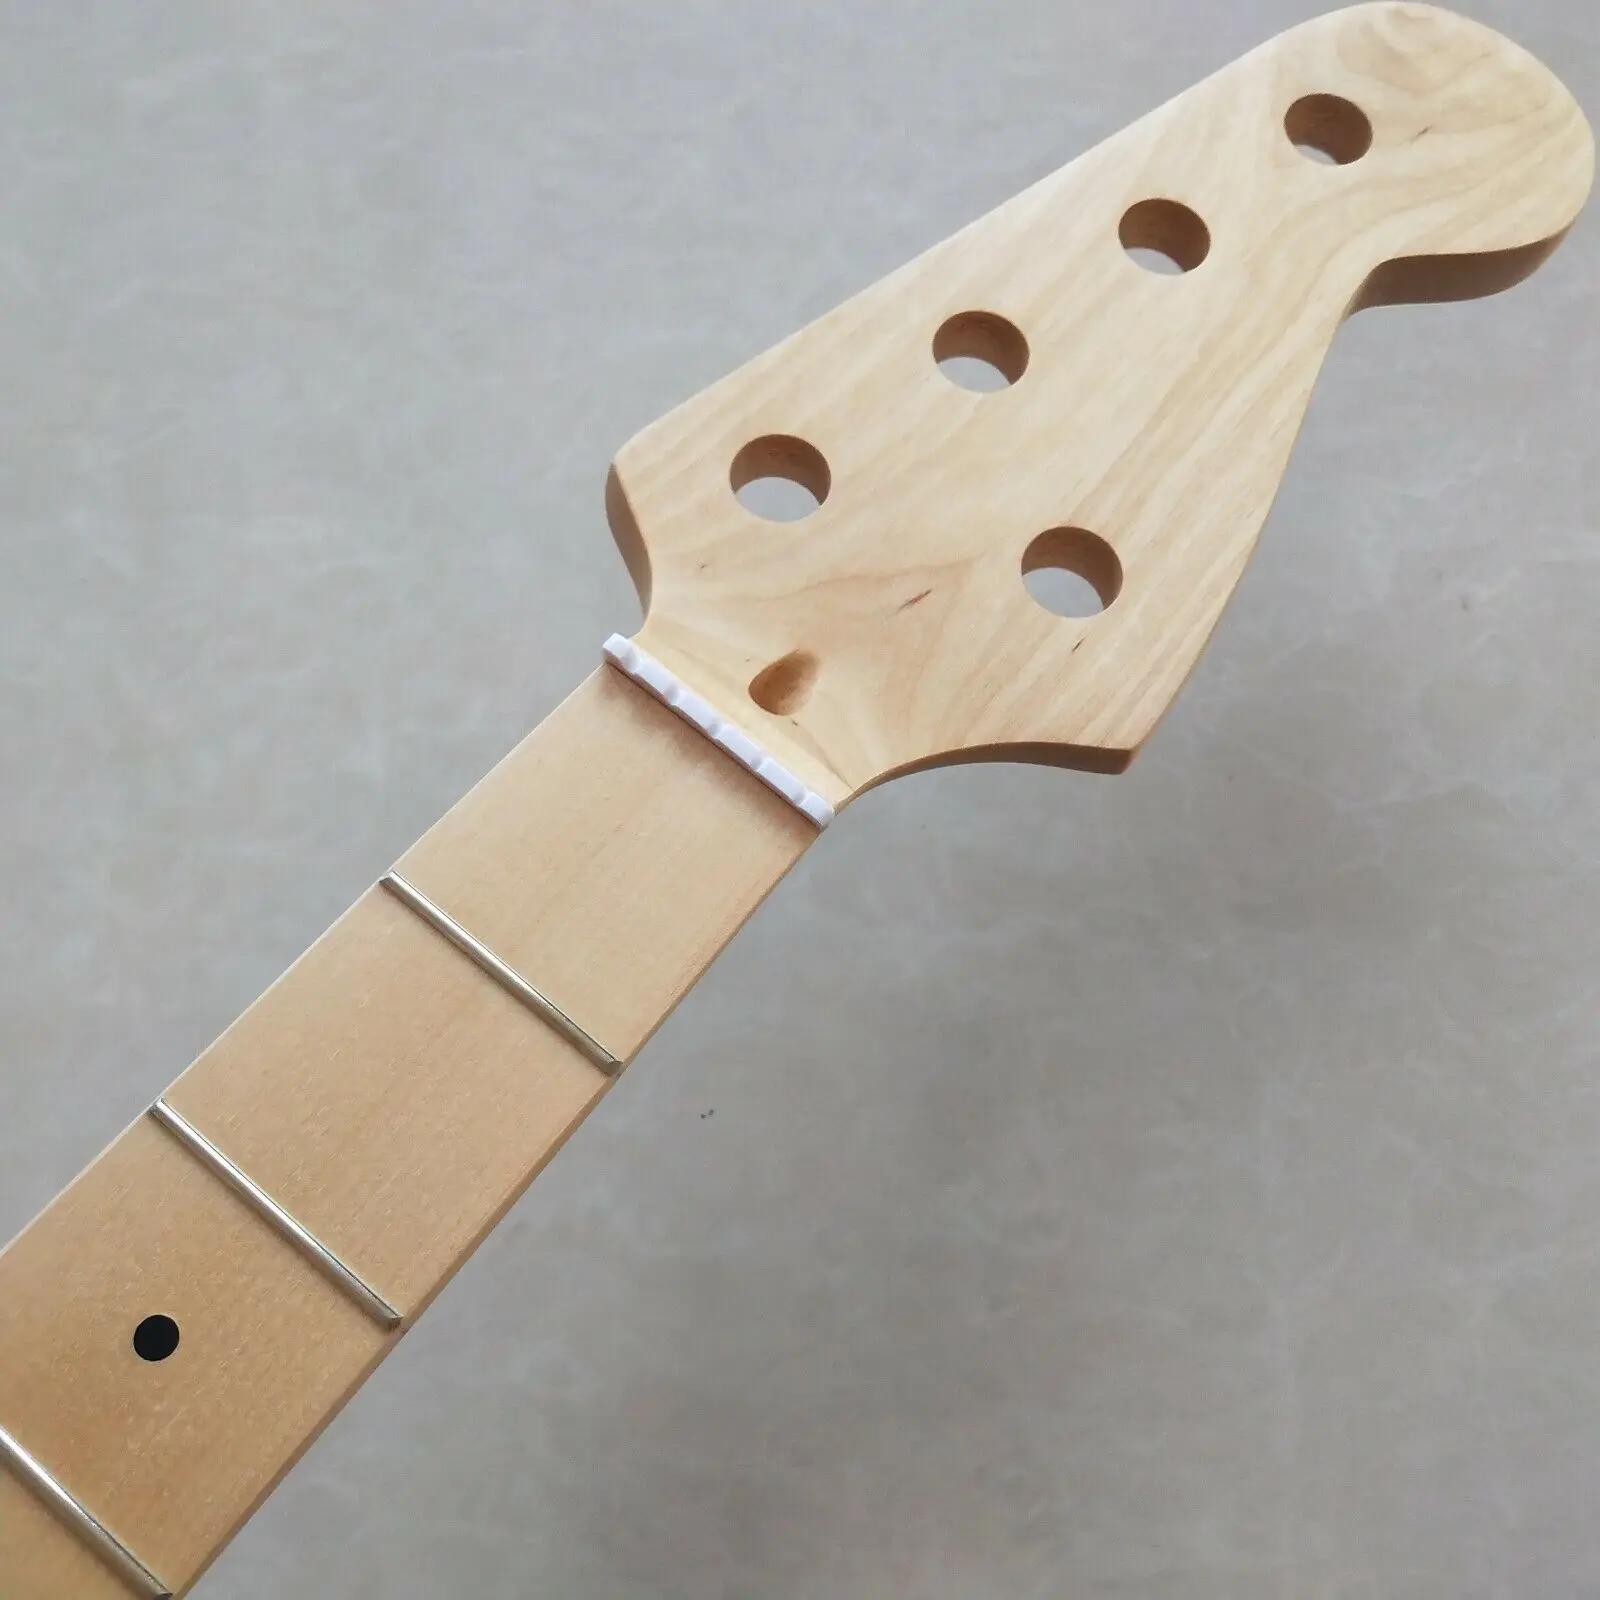 New 5 String Bass Guitar Neck 21 fret 34inch Maple Fretboard dots inlay parts